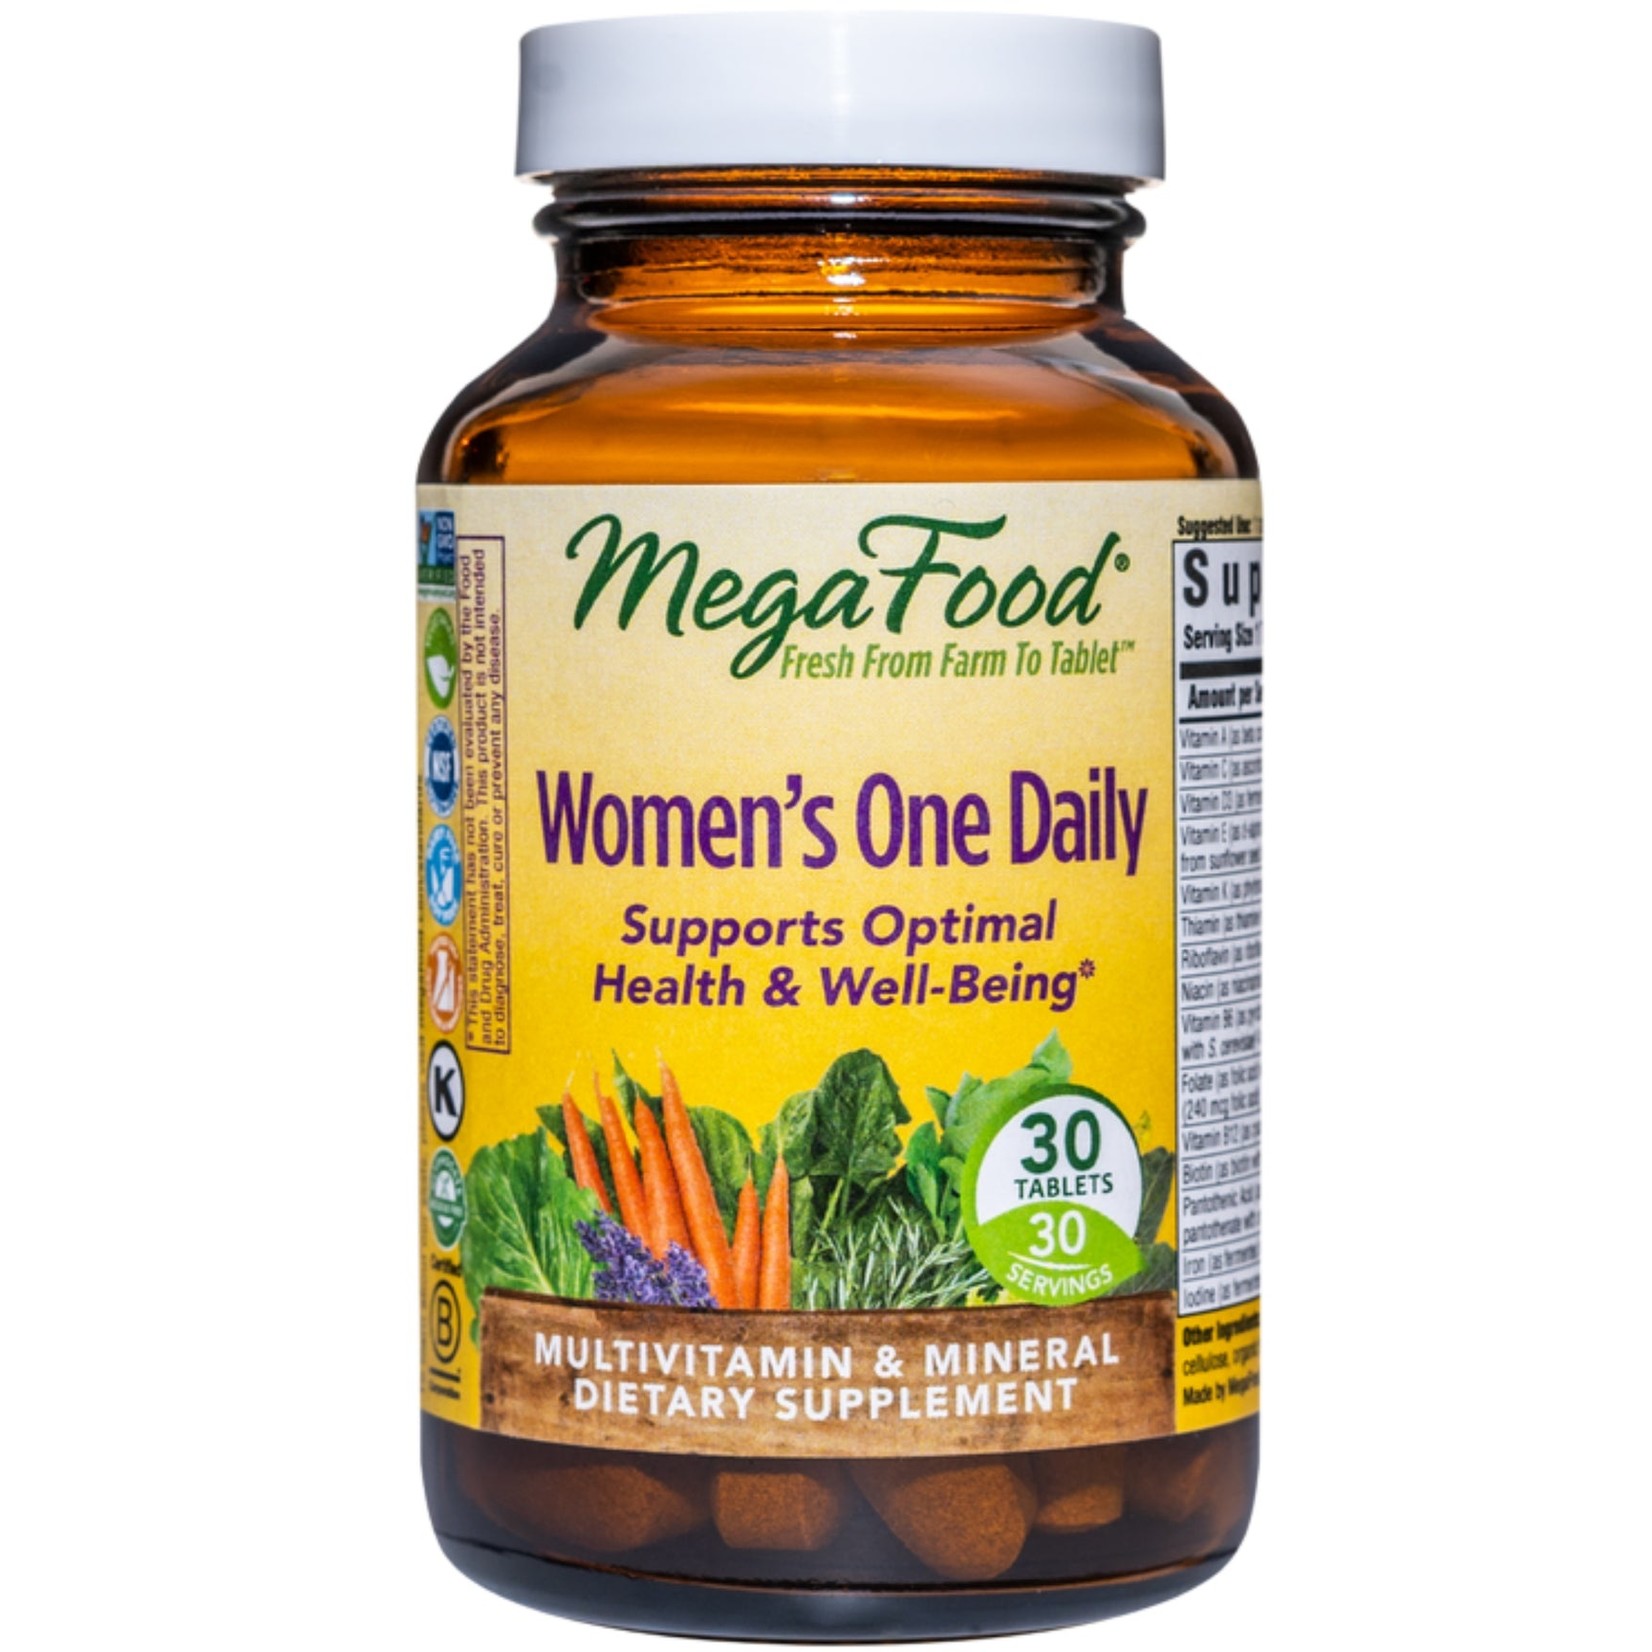 Megafood Megafood - Women's One Daily - 30 Tablets